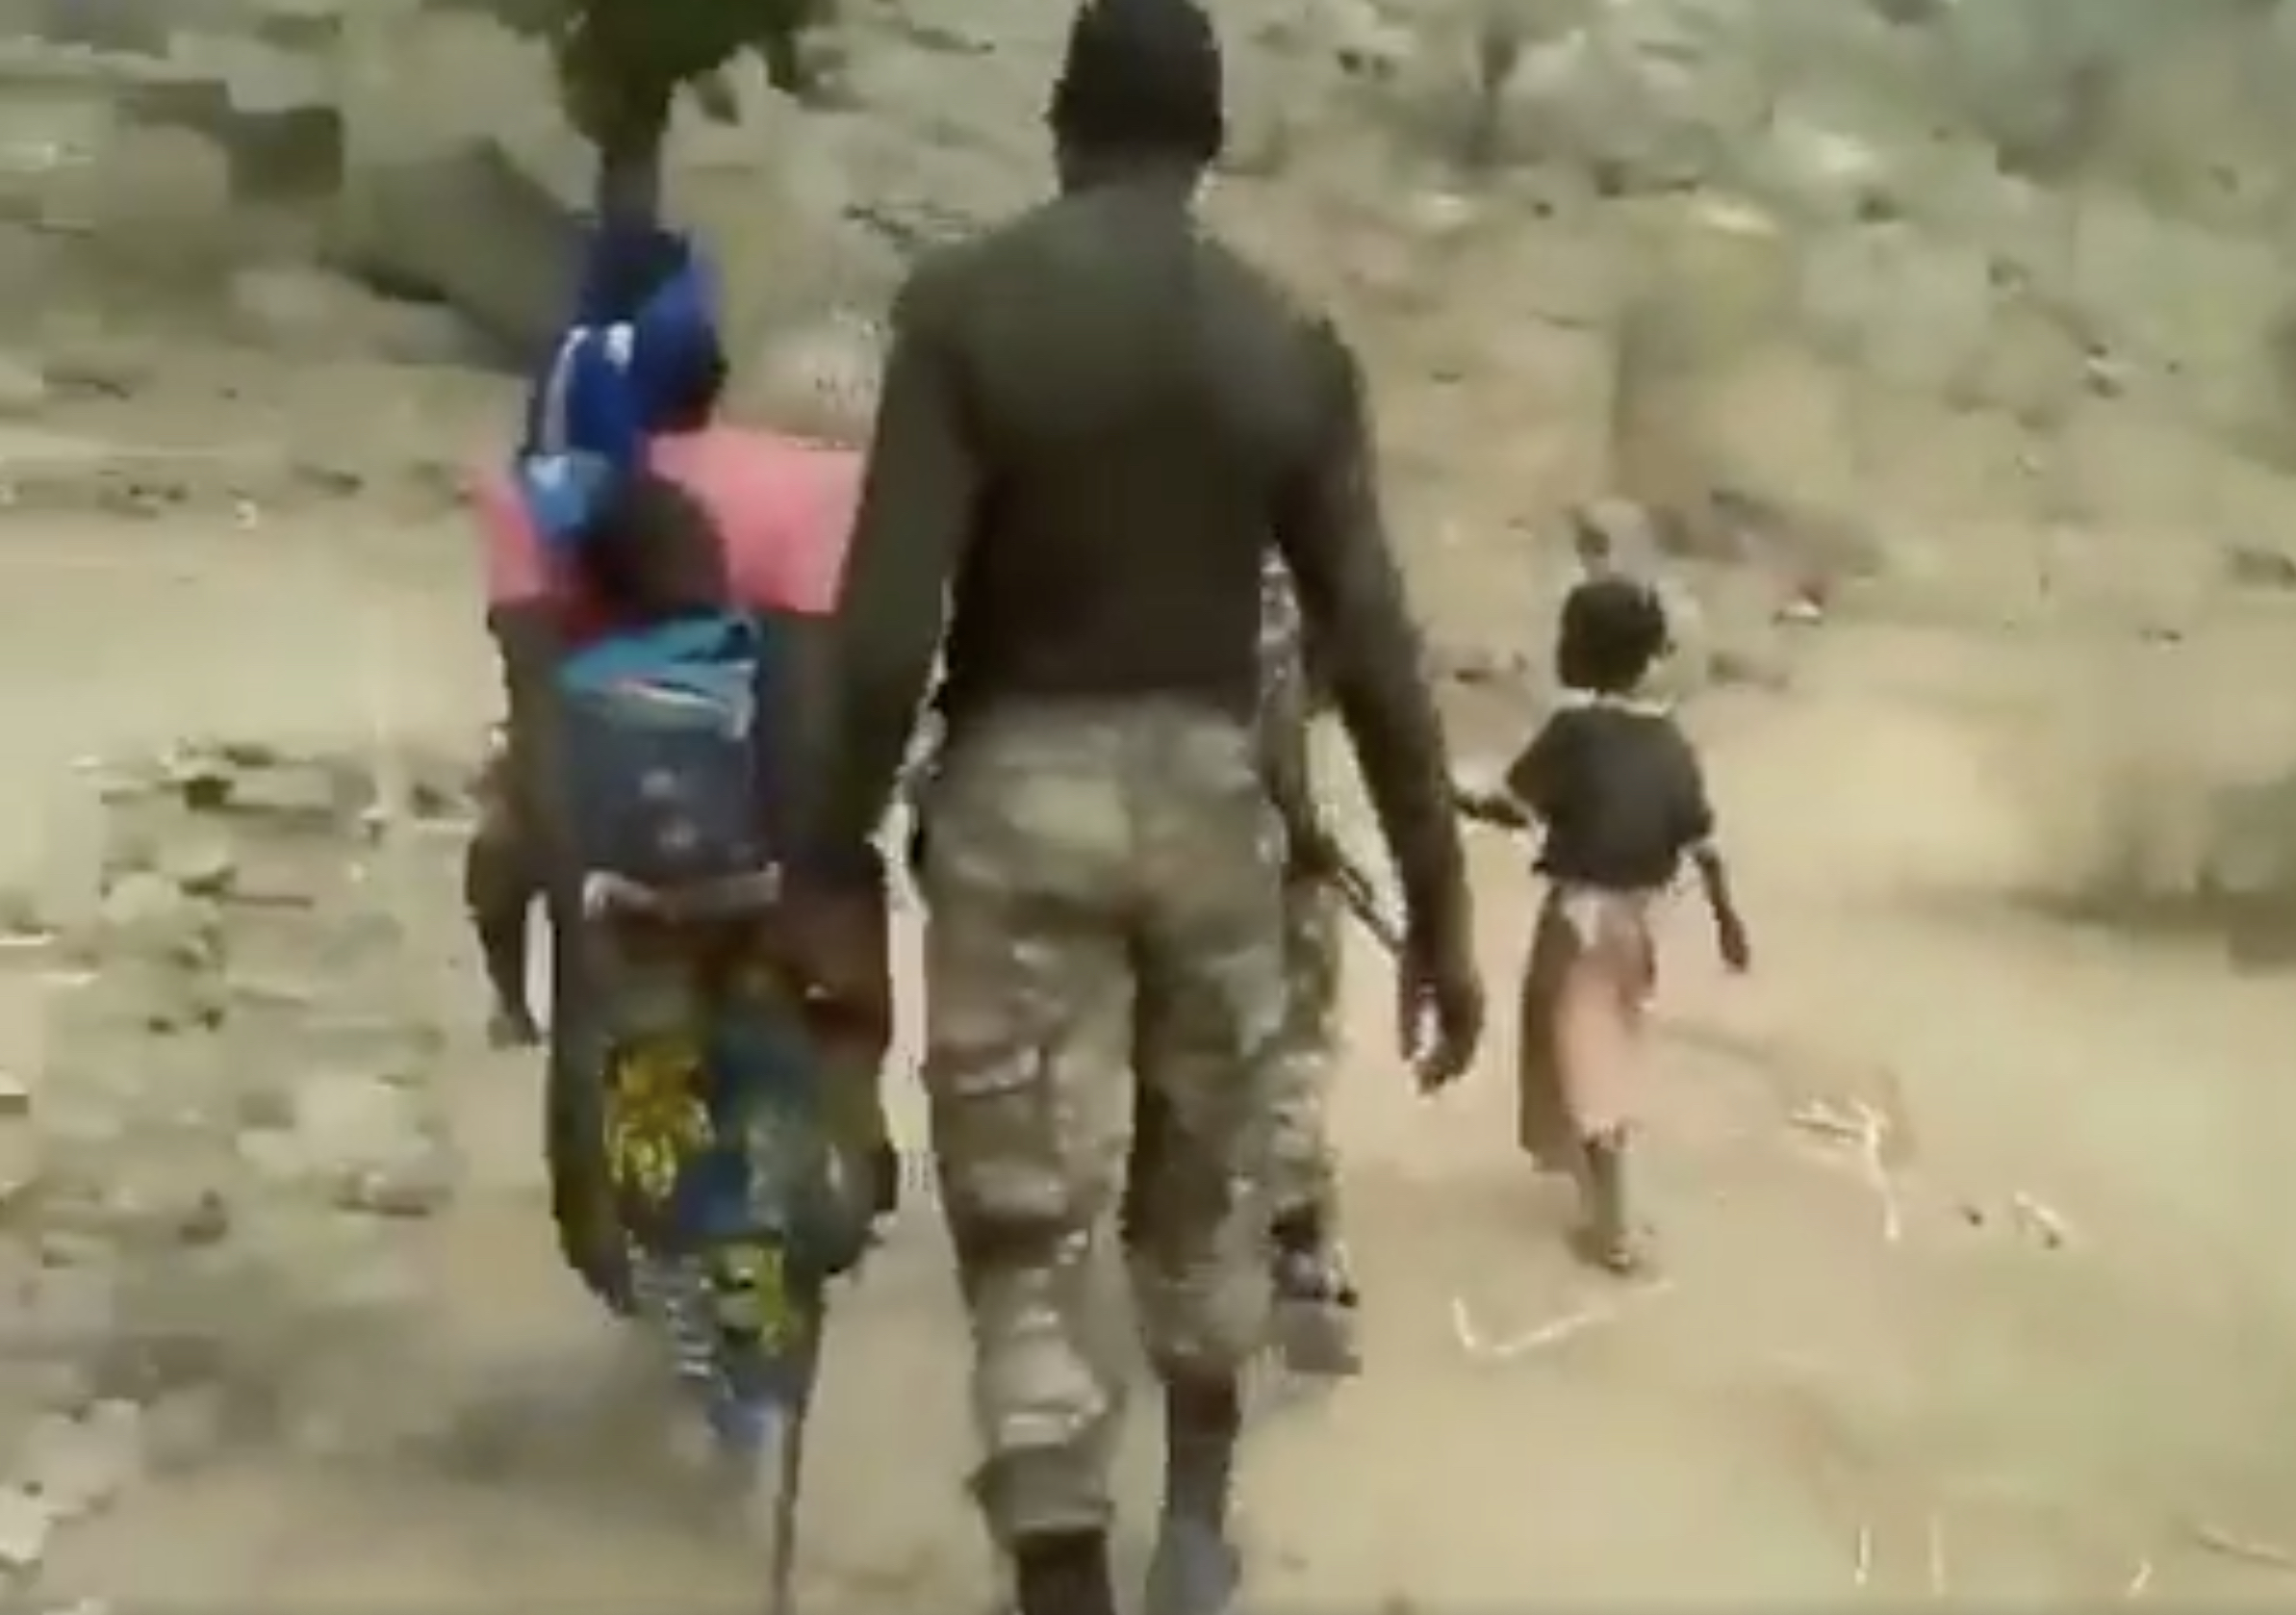 Screengrab from a video analyzed by the BBC’s Africa Eye investigation of a summary execution carried out by government soldiers of two women villagers, suspected of links to Boko Haram, and their children, Cameroon, July 2018